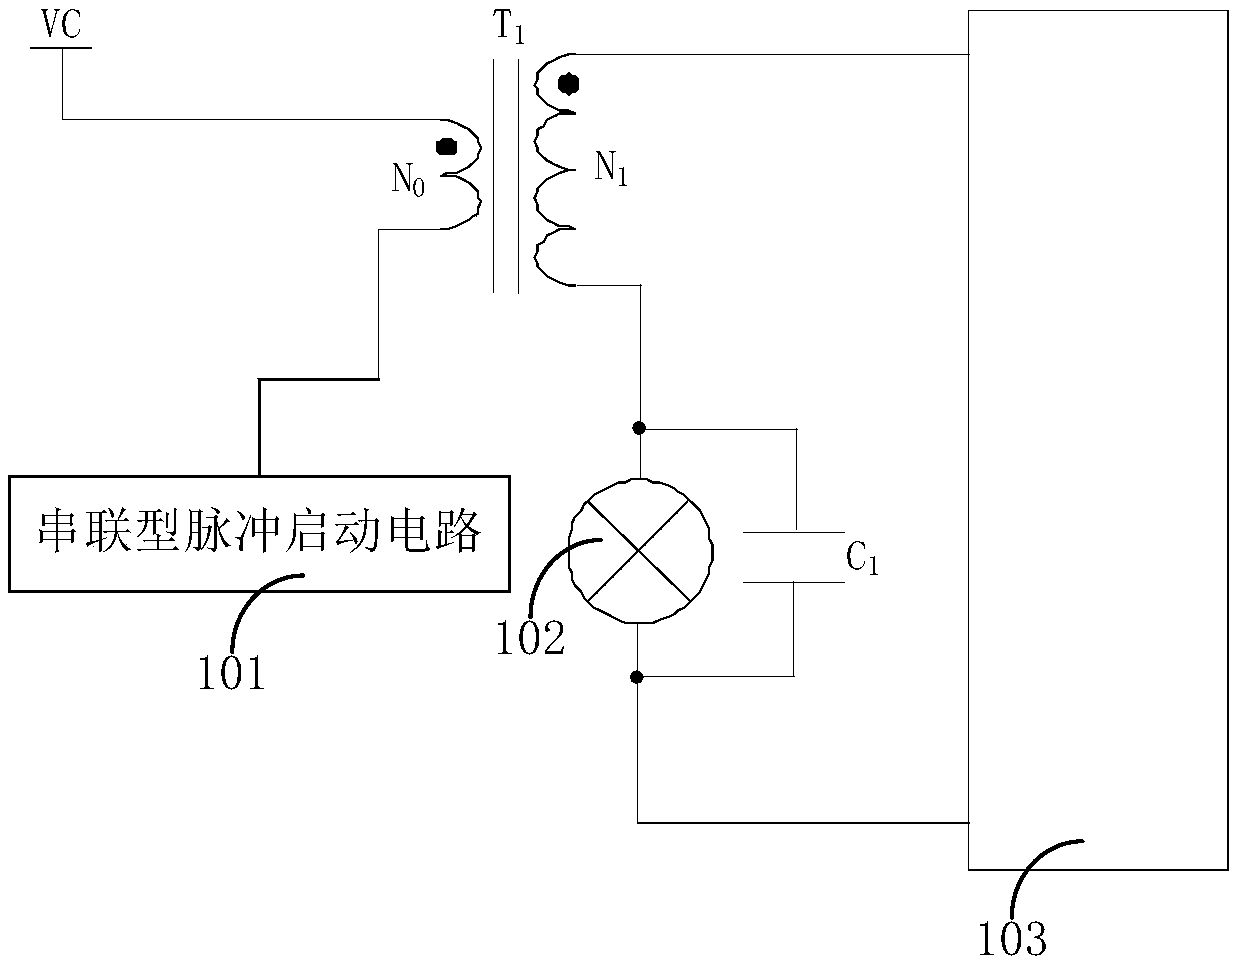 Driving circuit and switching power supply